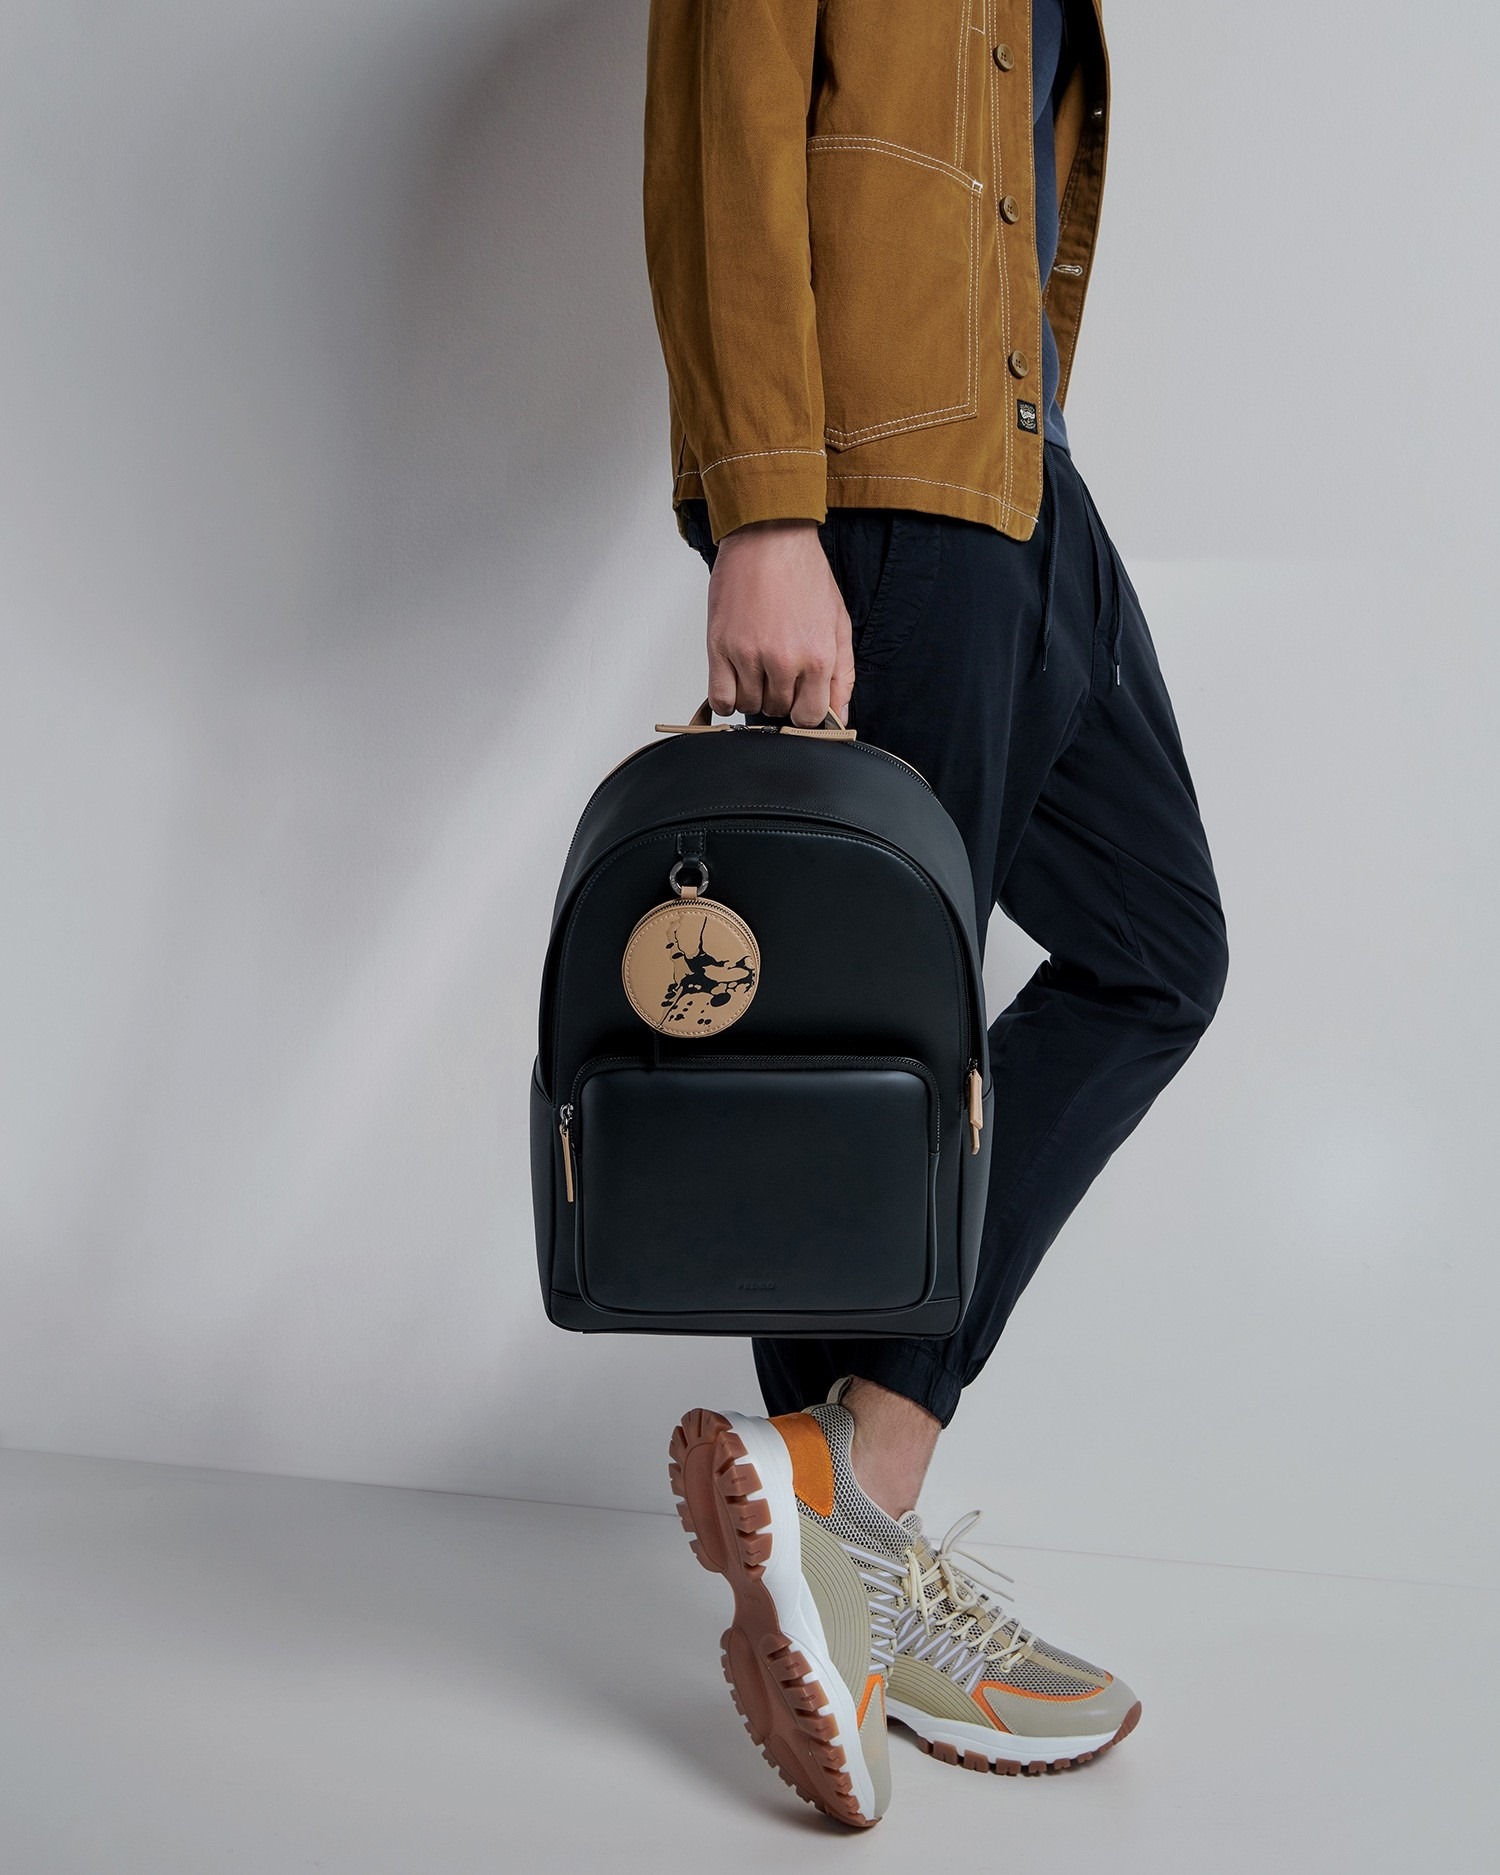 BALO CÔNG SỞ PEDRO CASUAL BACKPACK 7